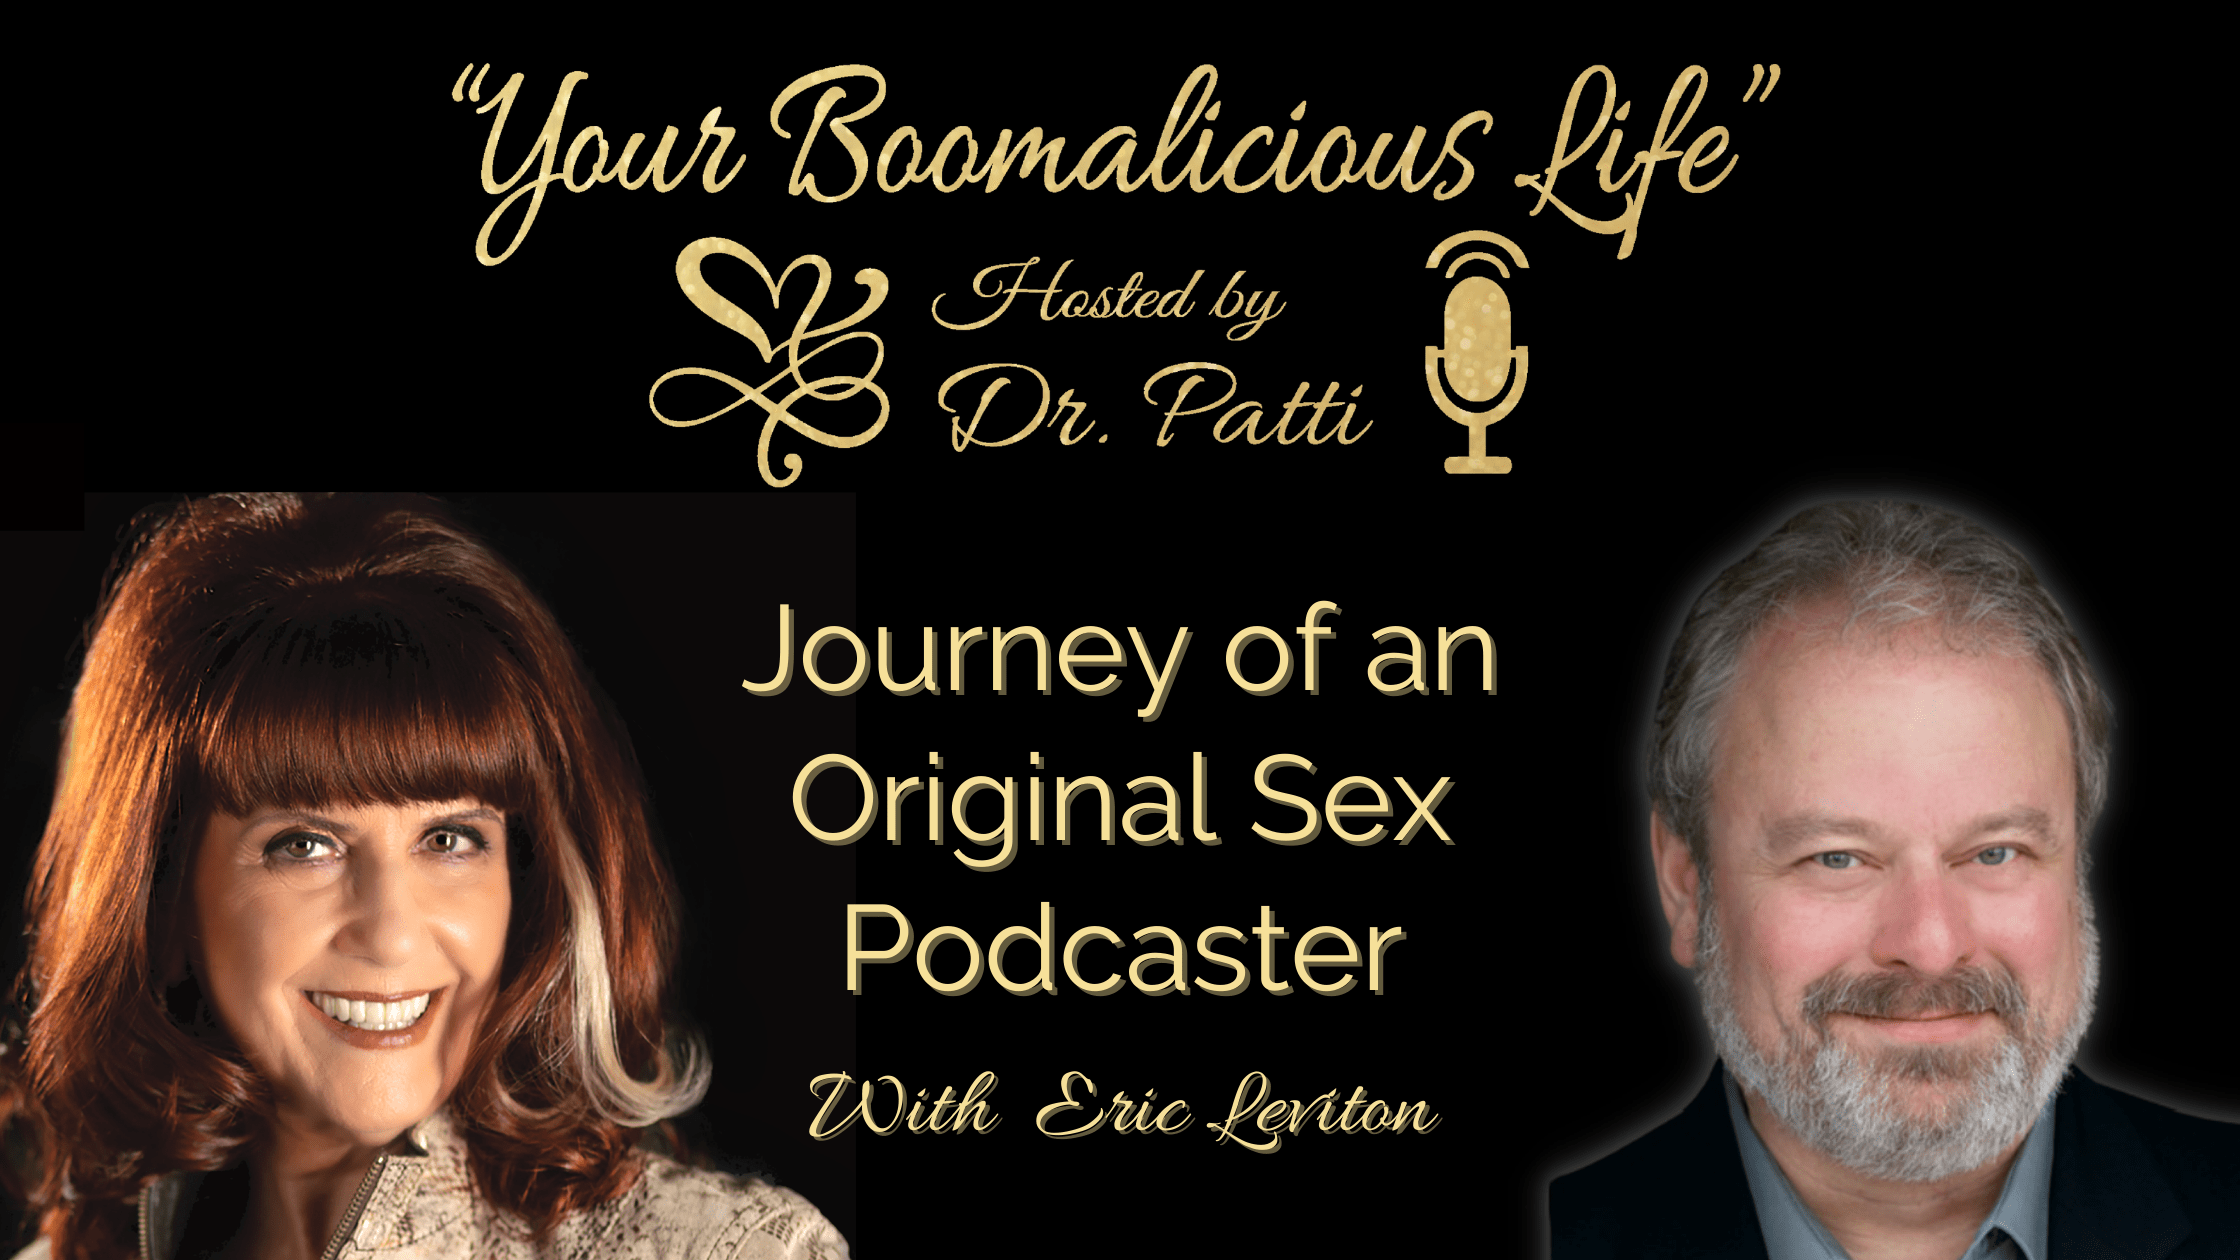 Episode 11: “An Original Sex Podcaster Talks about his Journey”